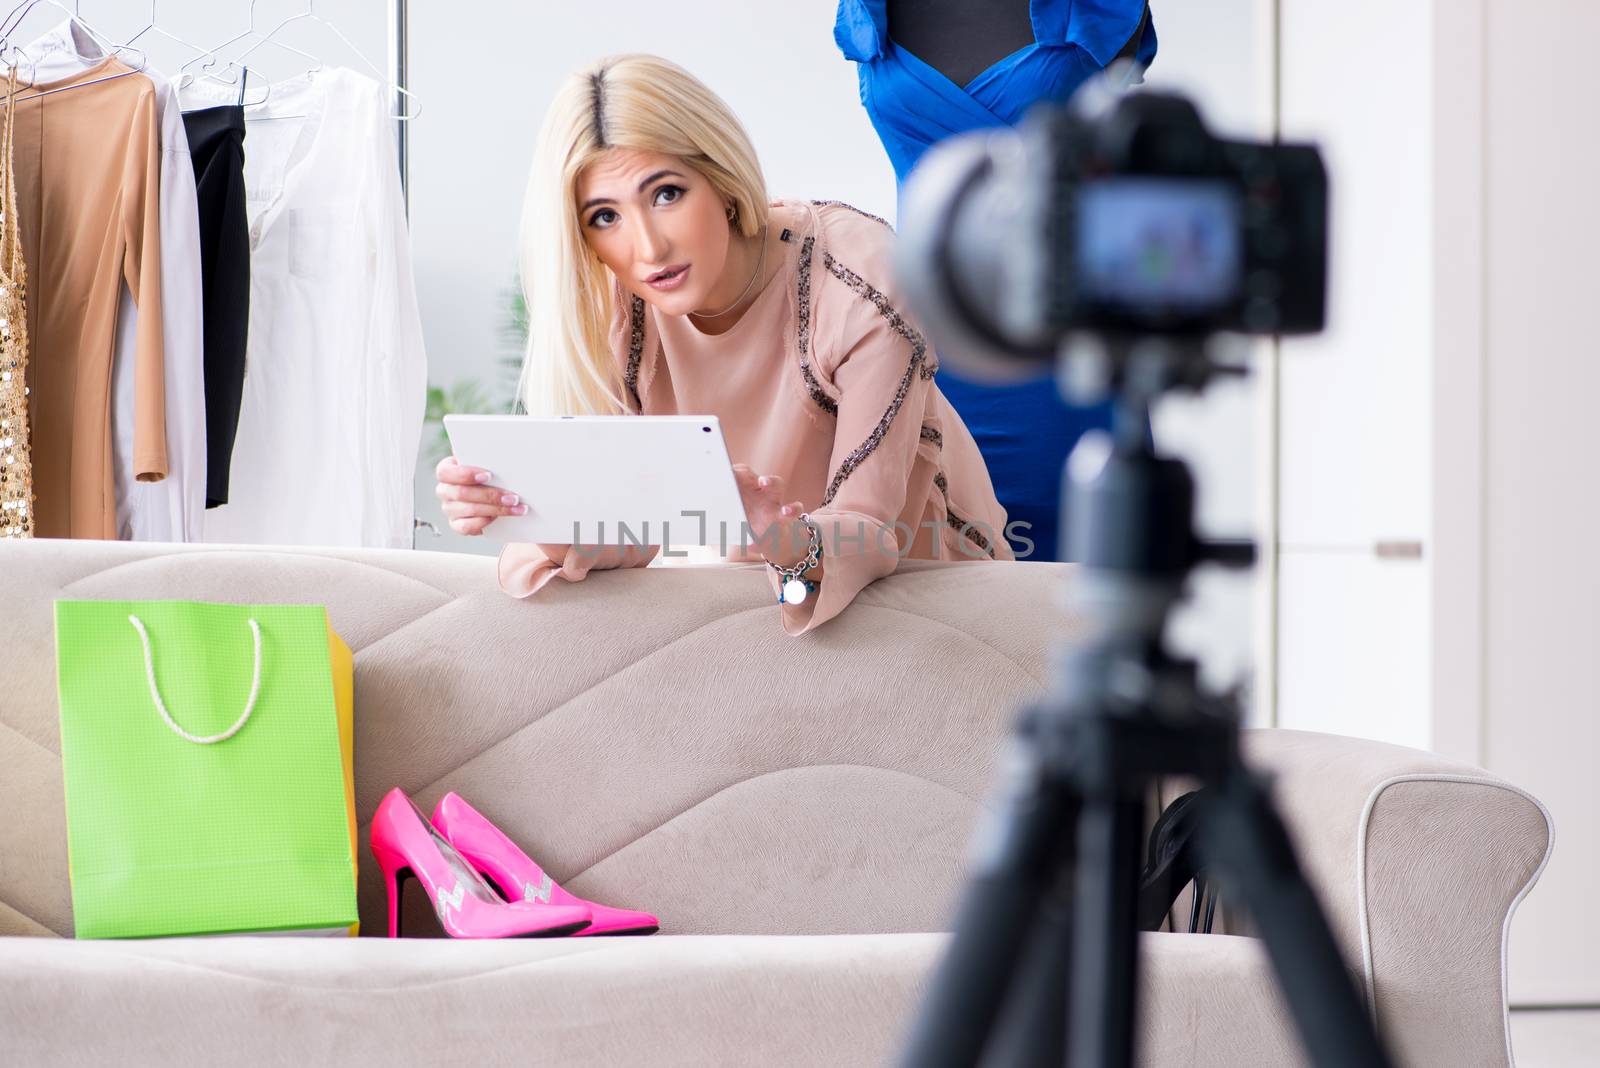 Fashion blogger recording new video for her vlog by Elnur